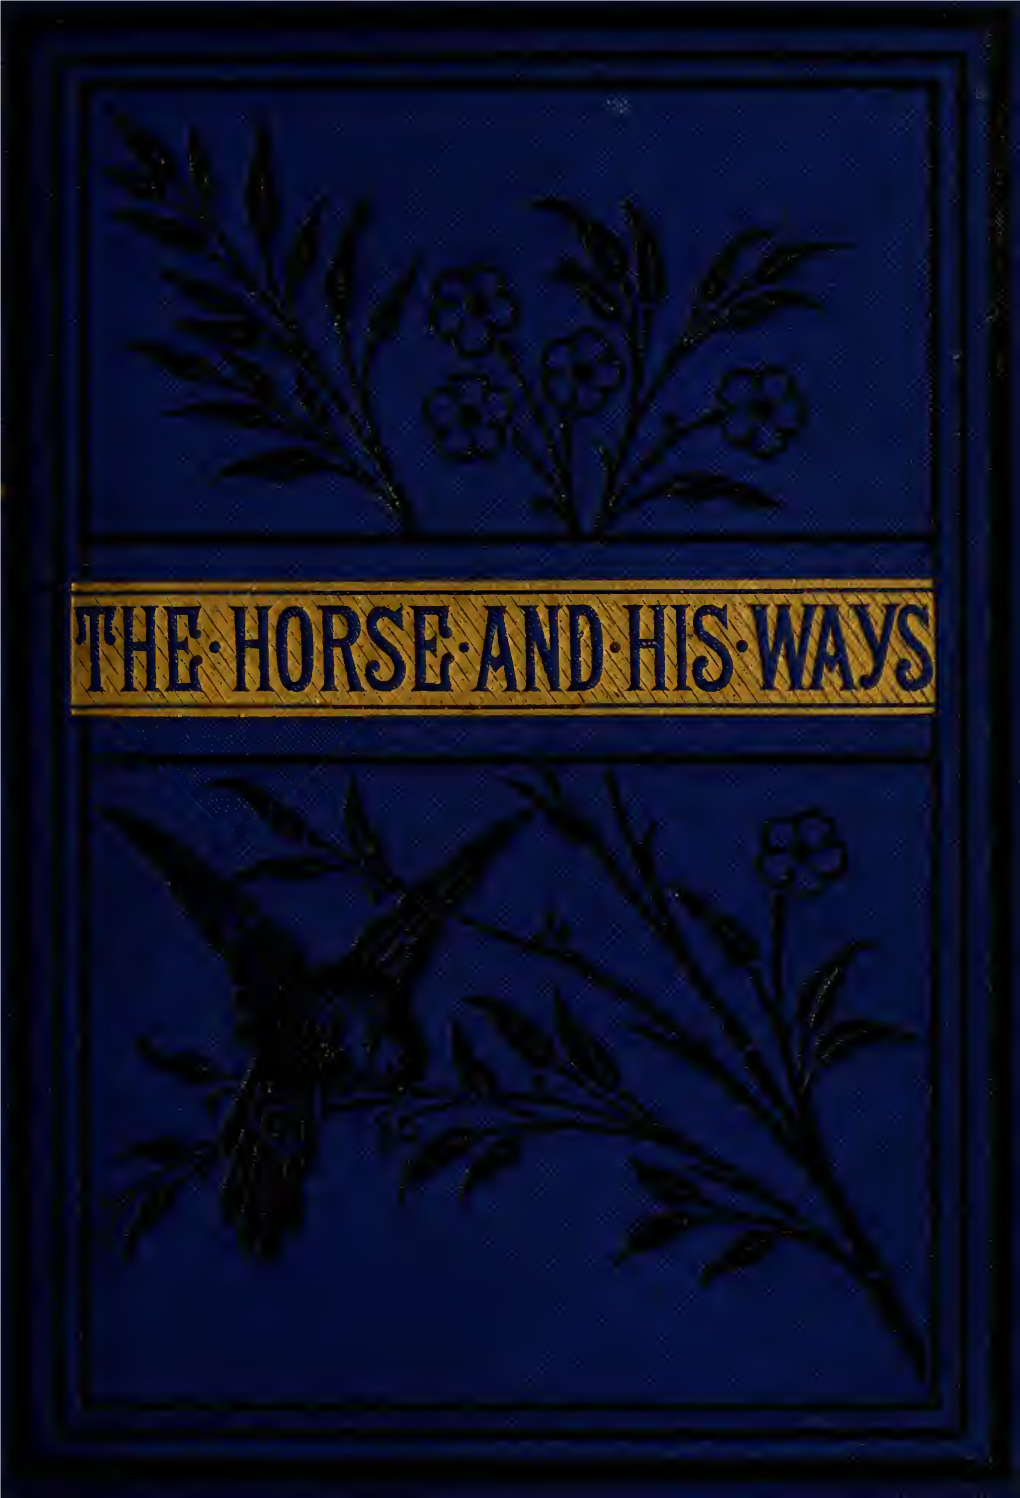 The Horse and His Ways